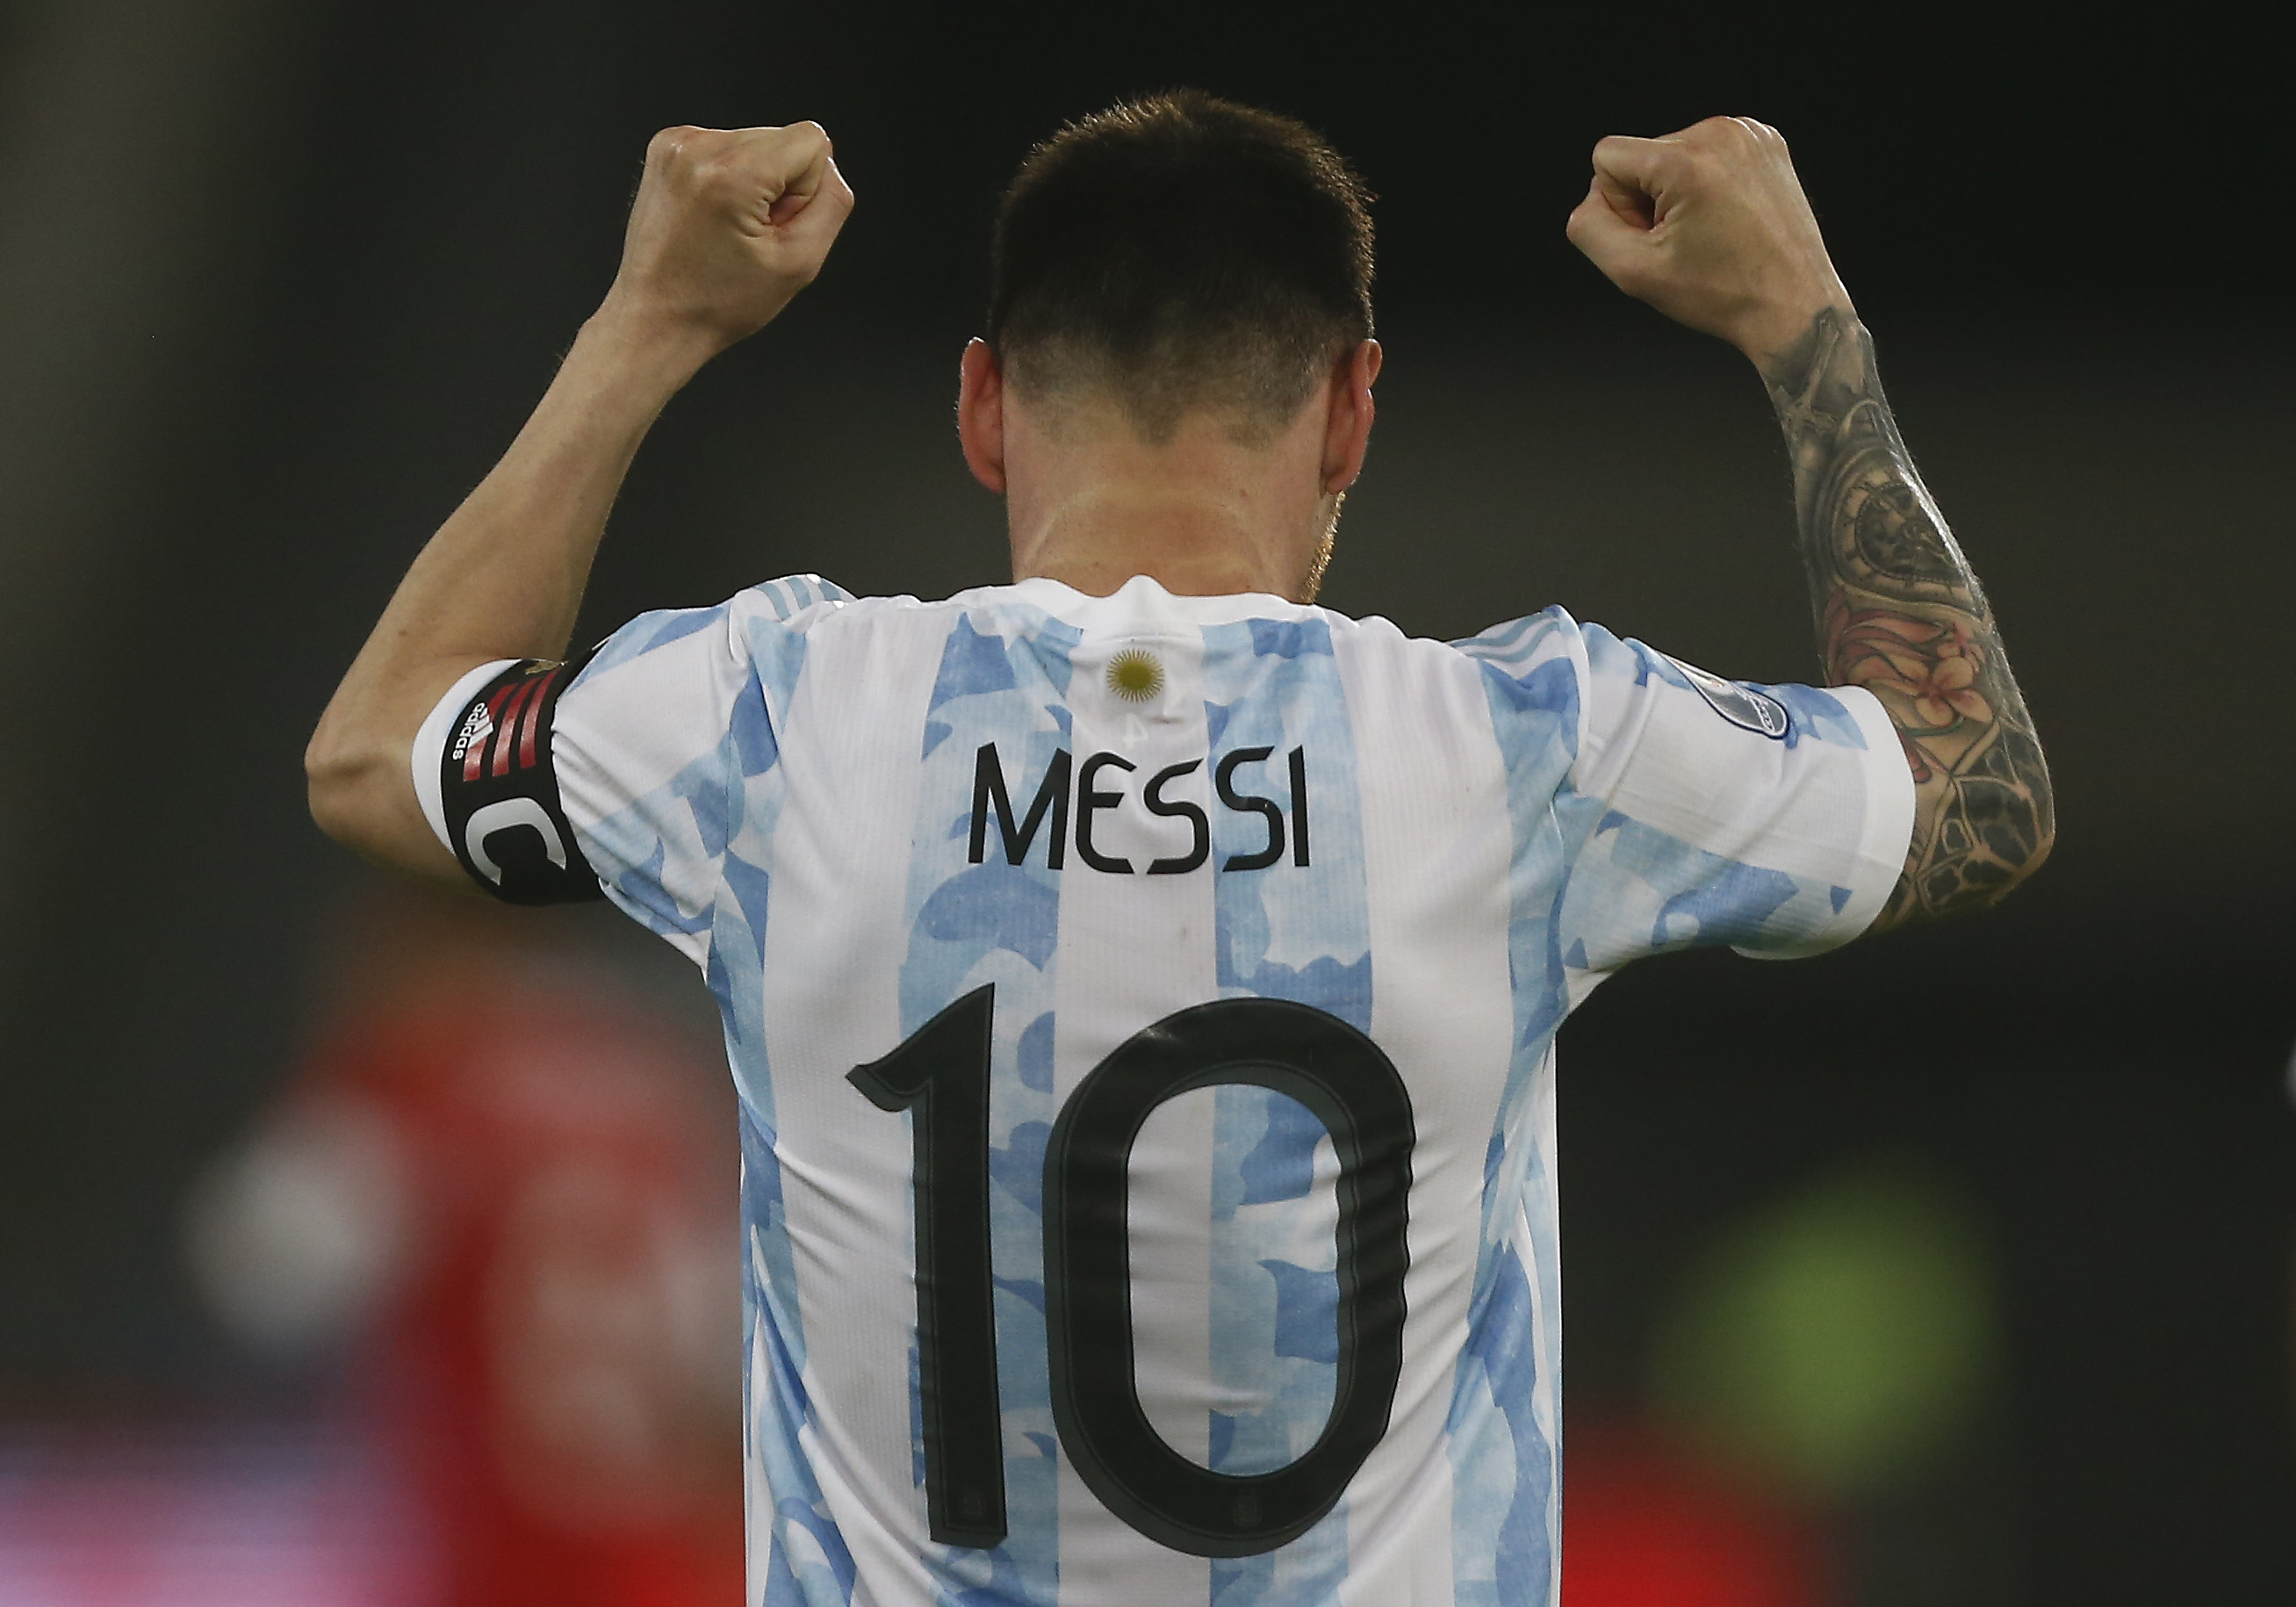 Messi Copa America Jersey Wallpapers